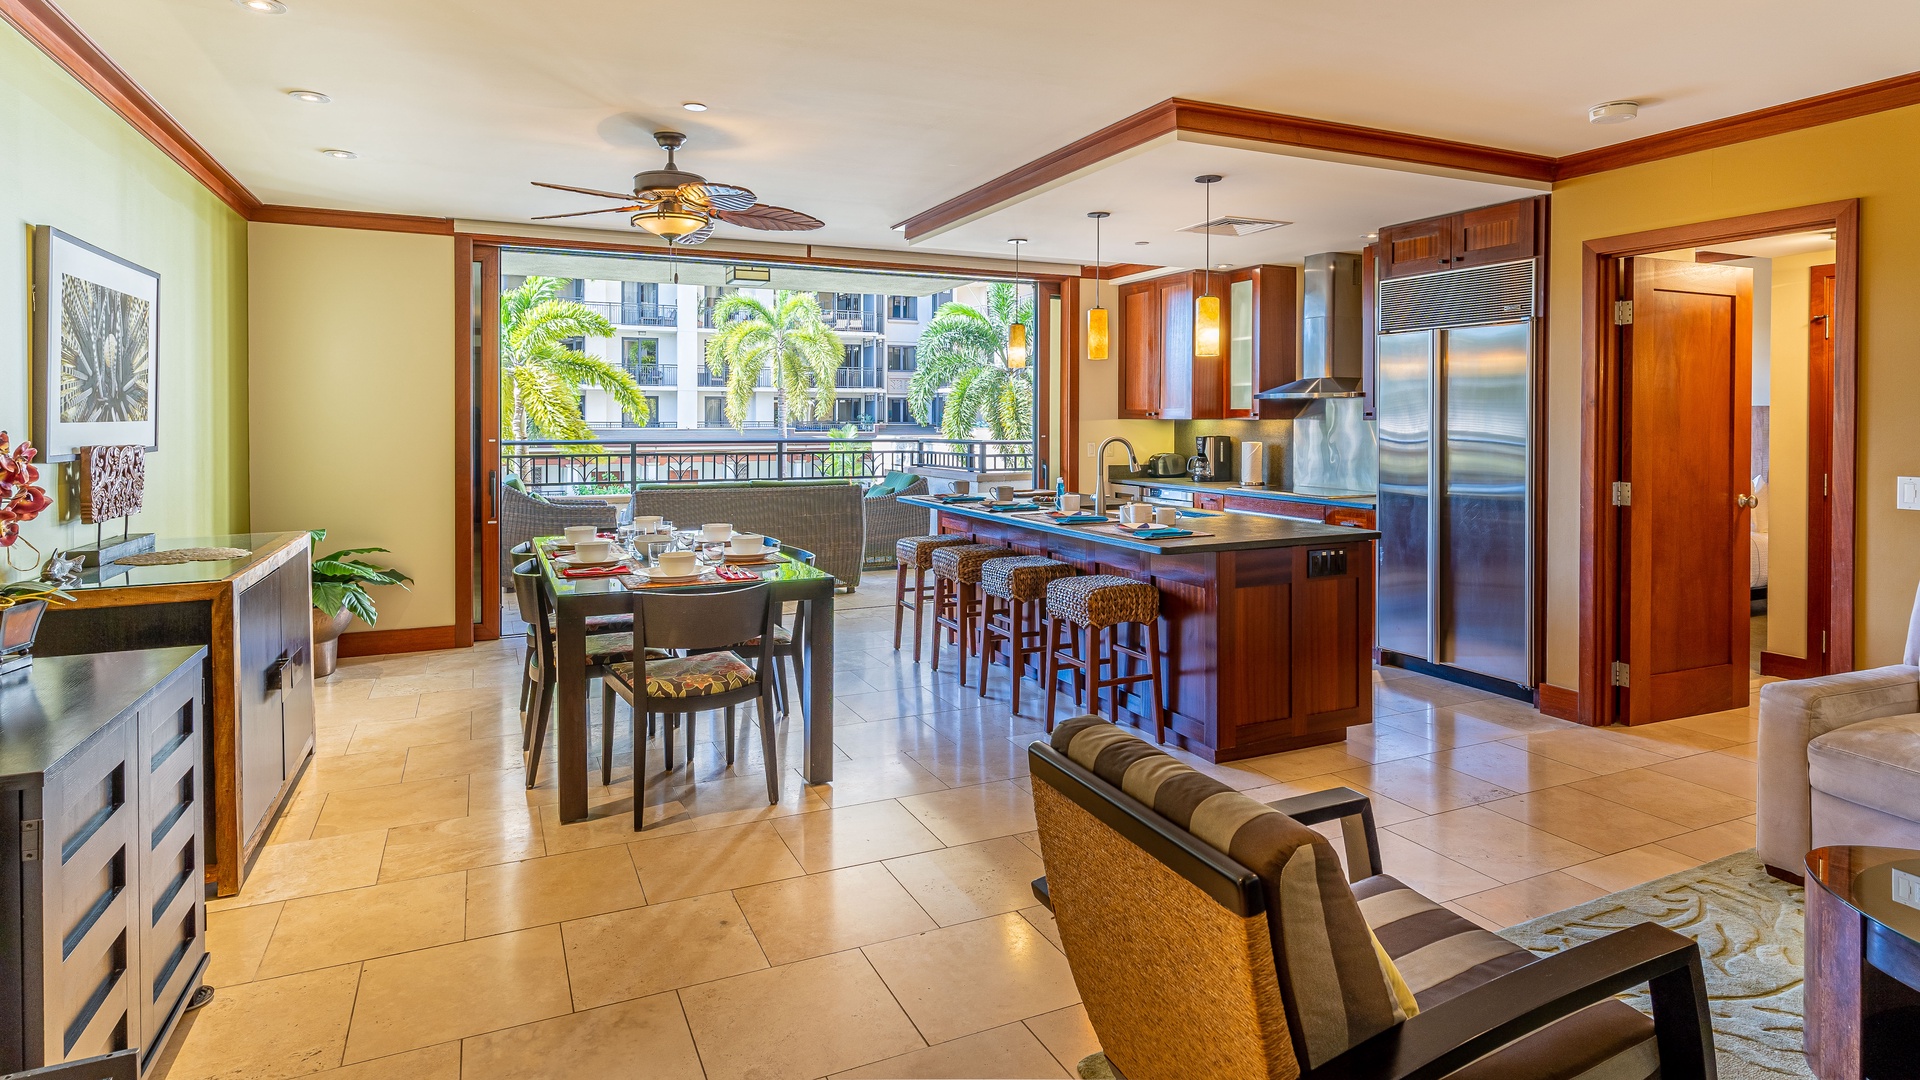 Kapolei Vacation Rentals, Ko Olina Beach Villas O224 - The open floor plan for the kitchen, living and dining areas.